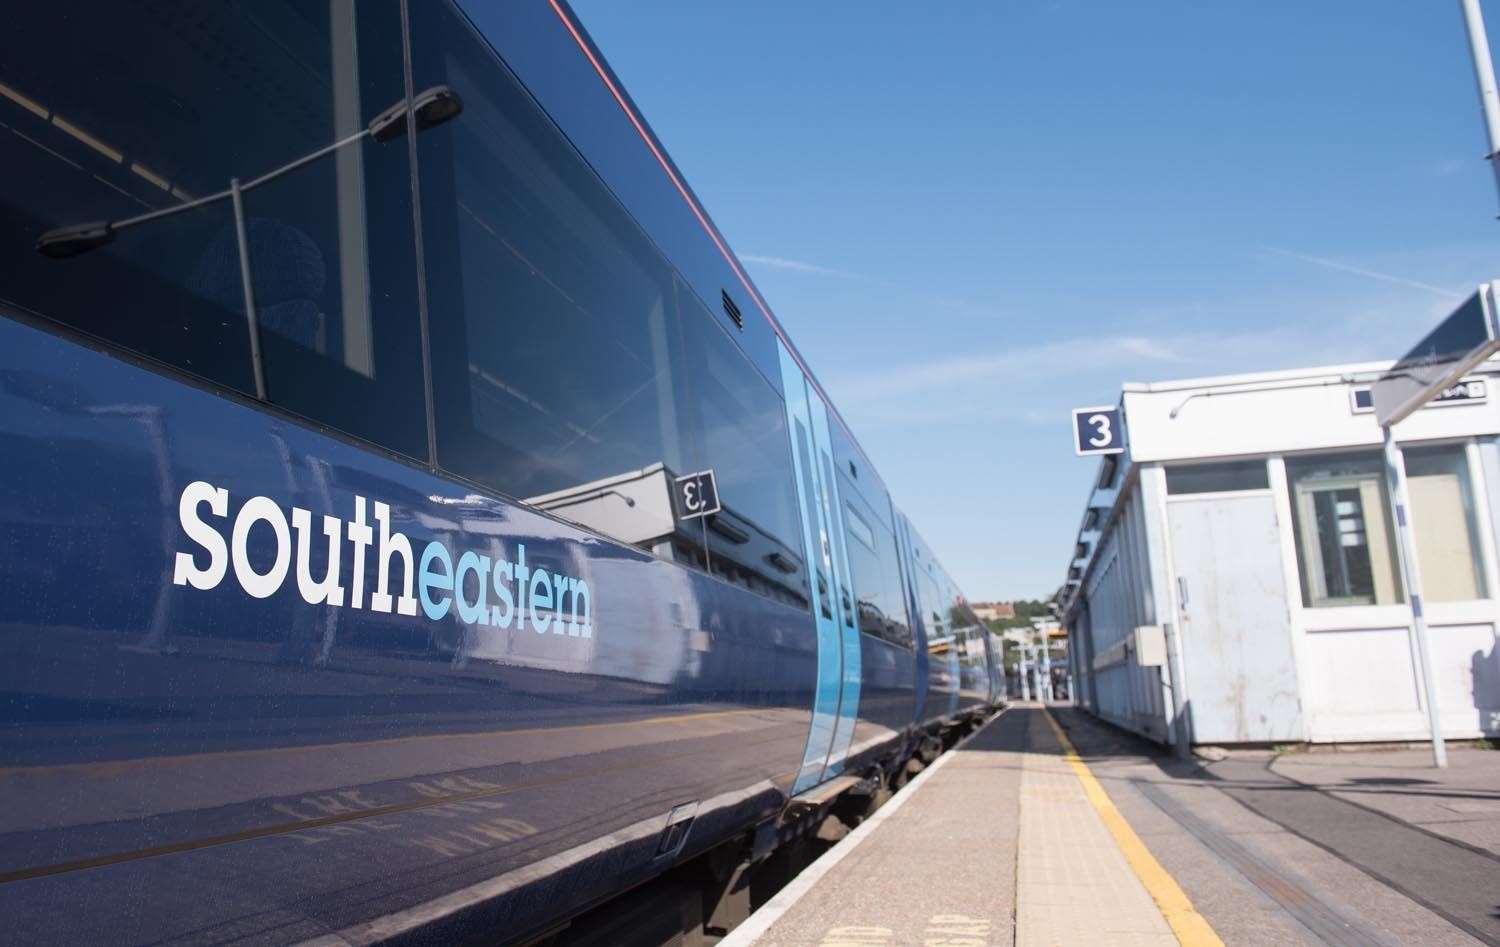 Southeastern has launched its new timetable with more frequent services and longer trains